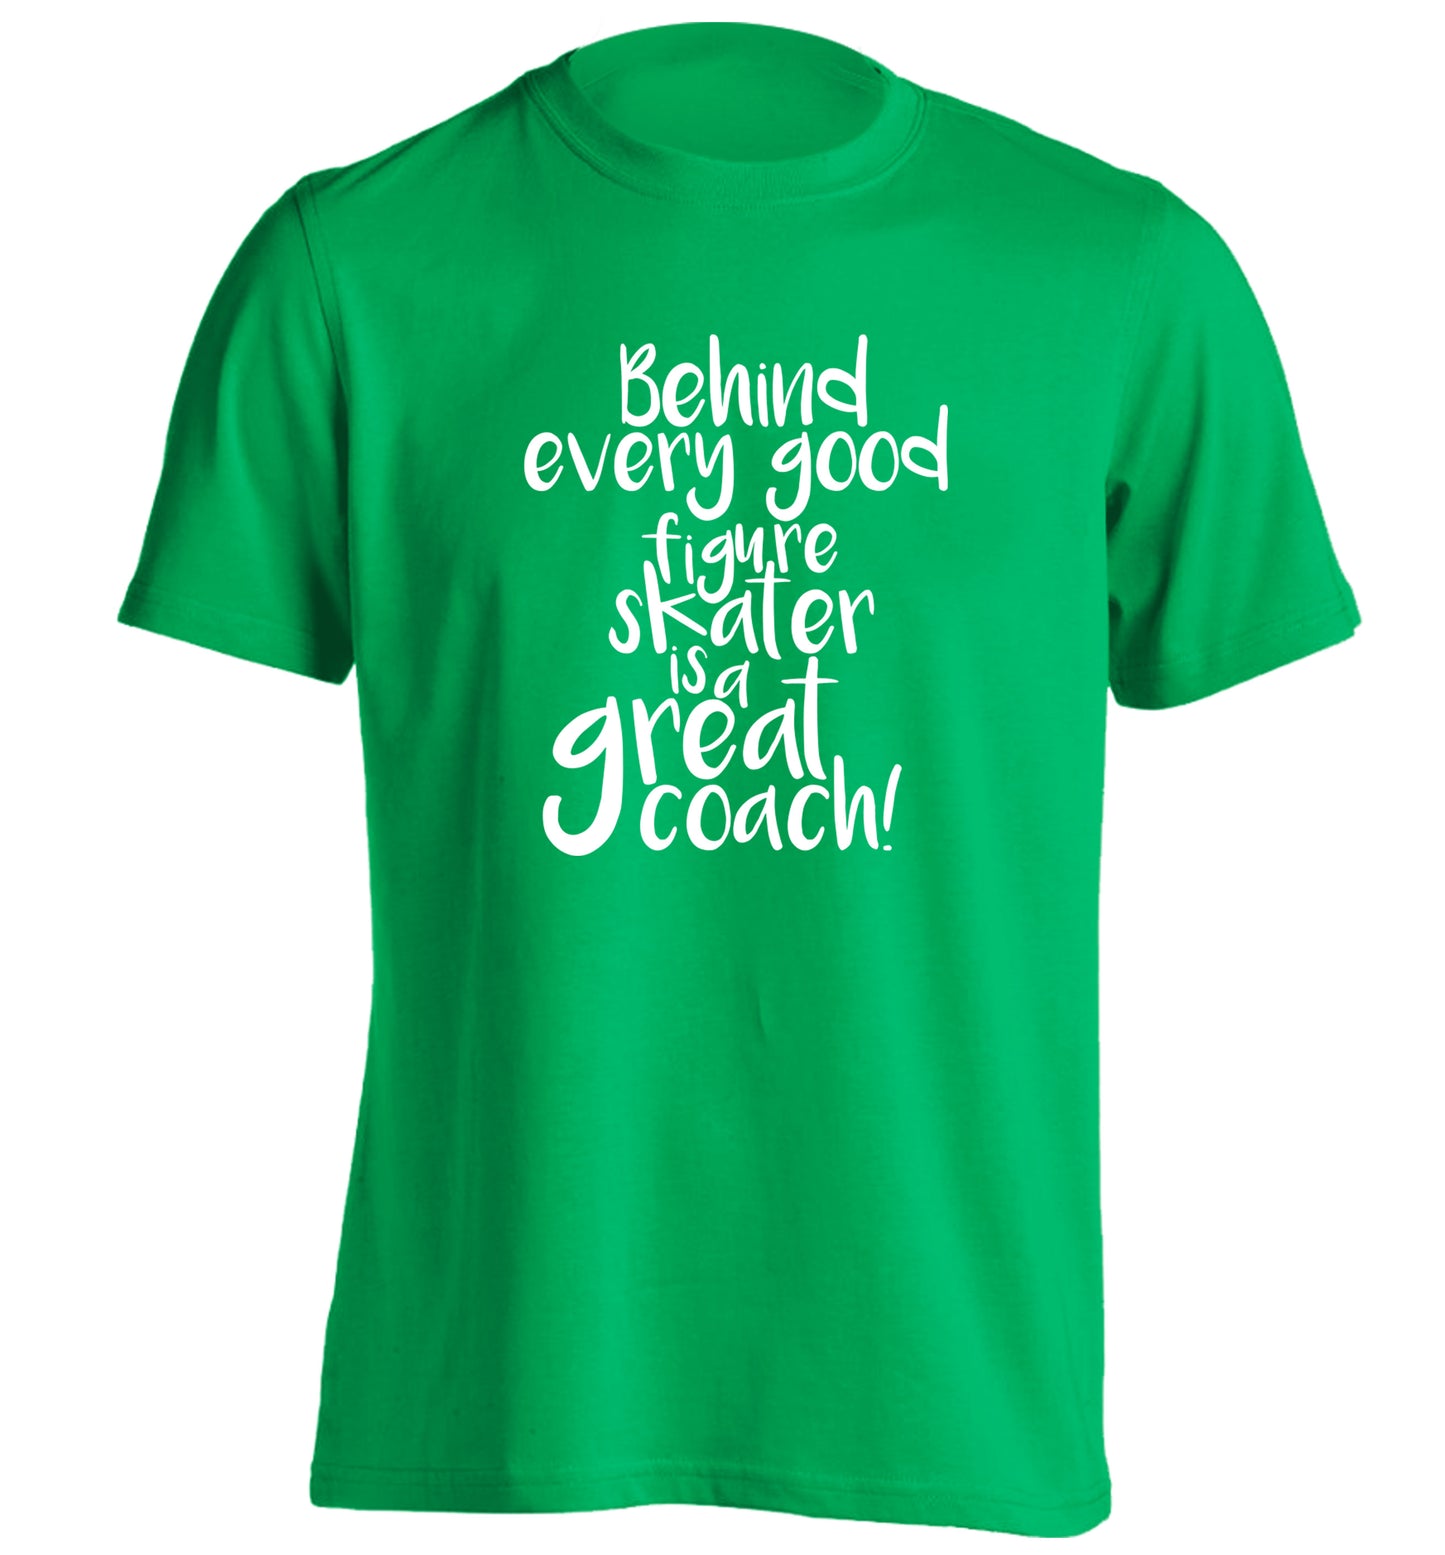 Behind every good figure skater is a great coach adults unisexgreen Tshirt 2XL